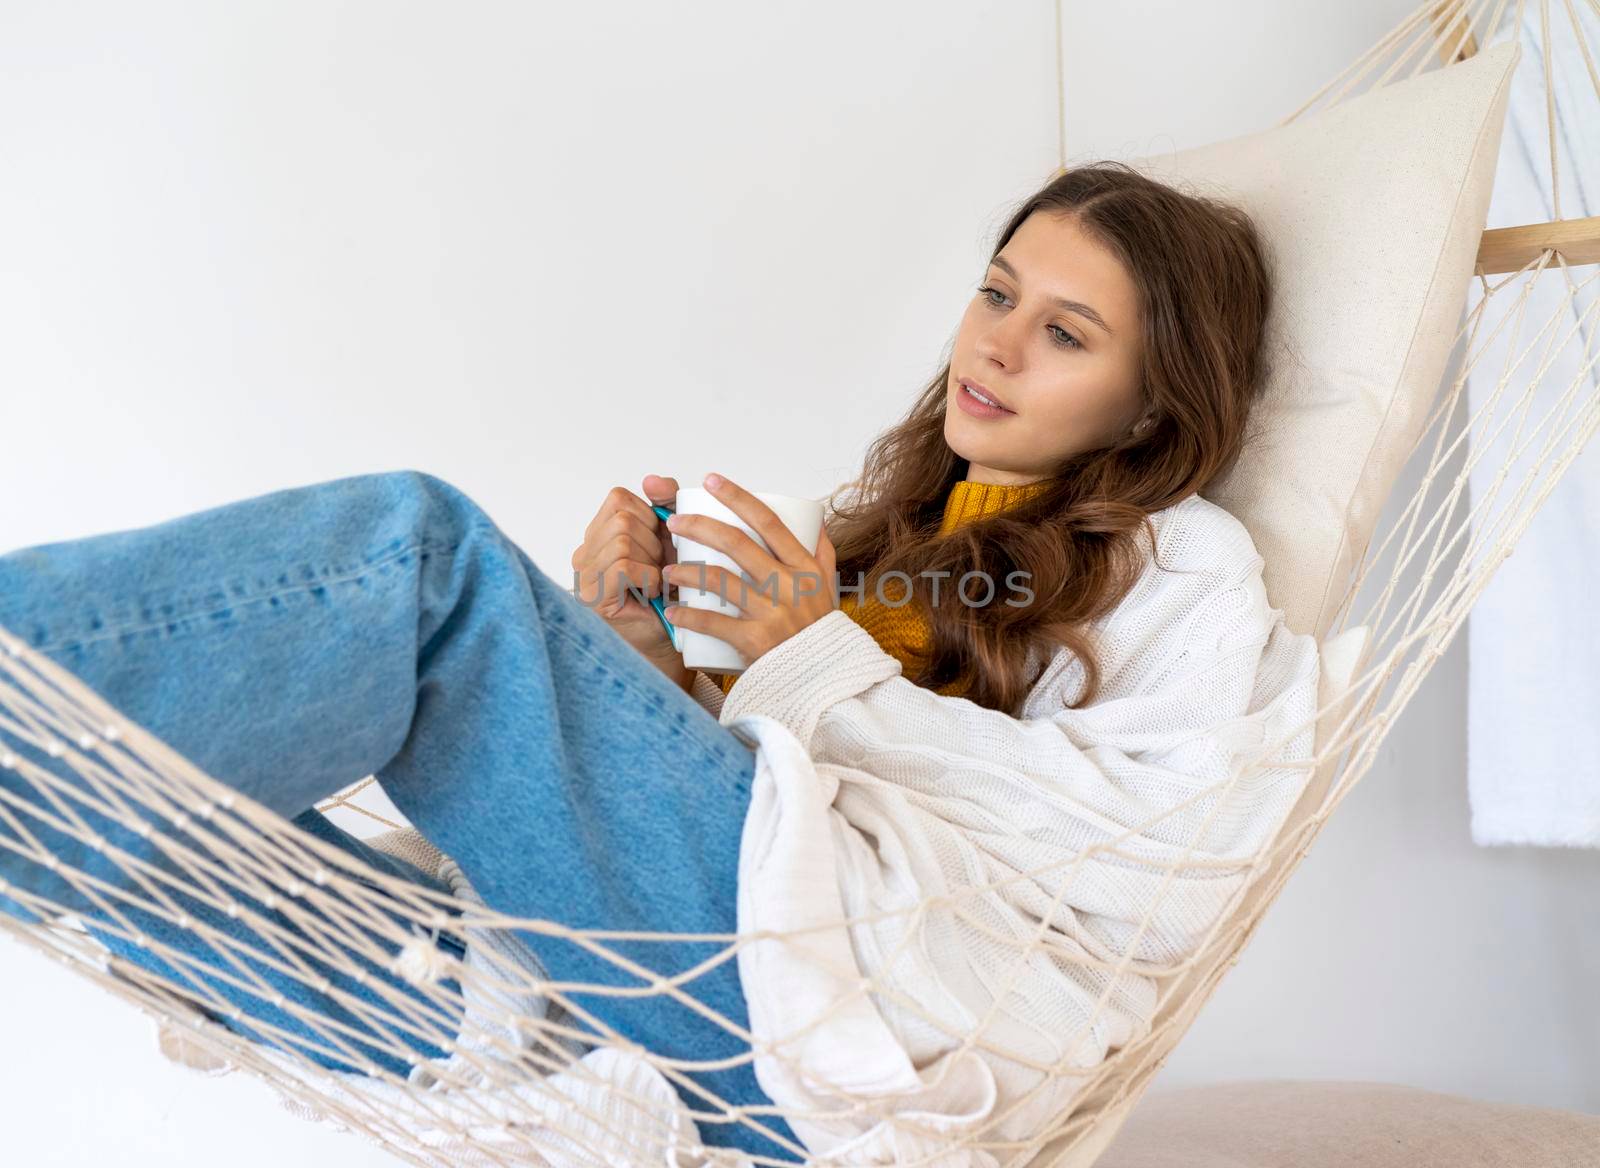 Cup of tea or coffee. Woman drinking hot beverage and enjoying morning, sitting on hammock and dreaming, relaxed mood.